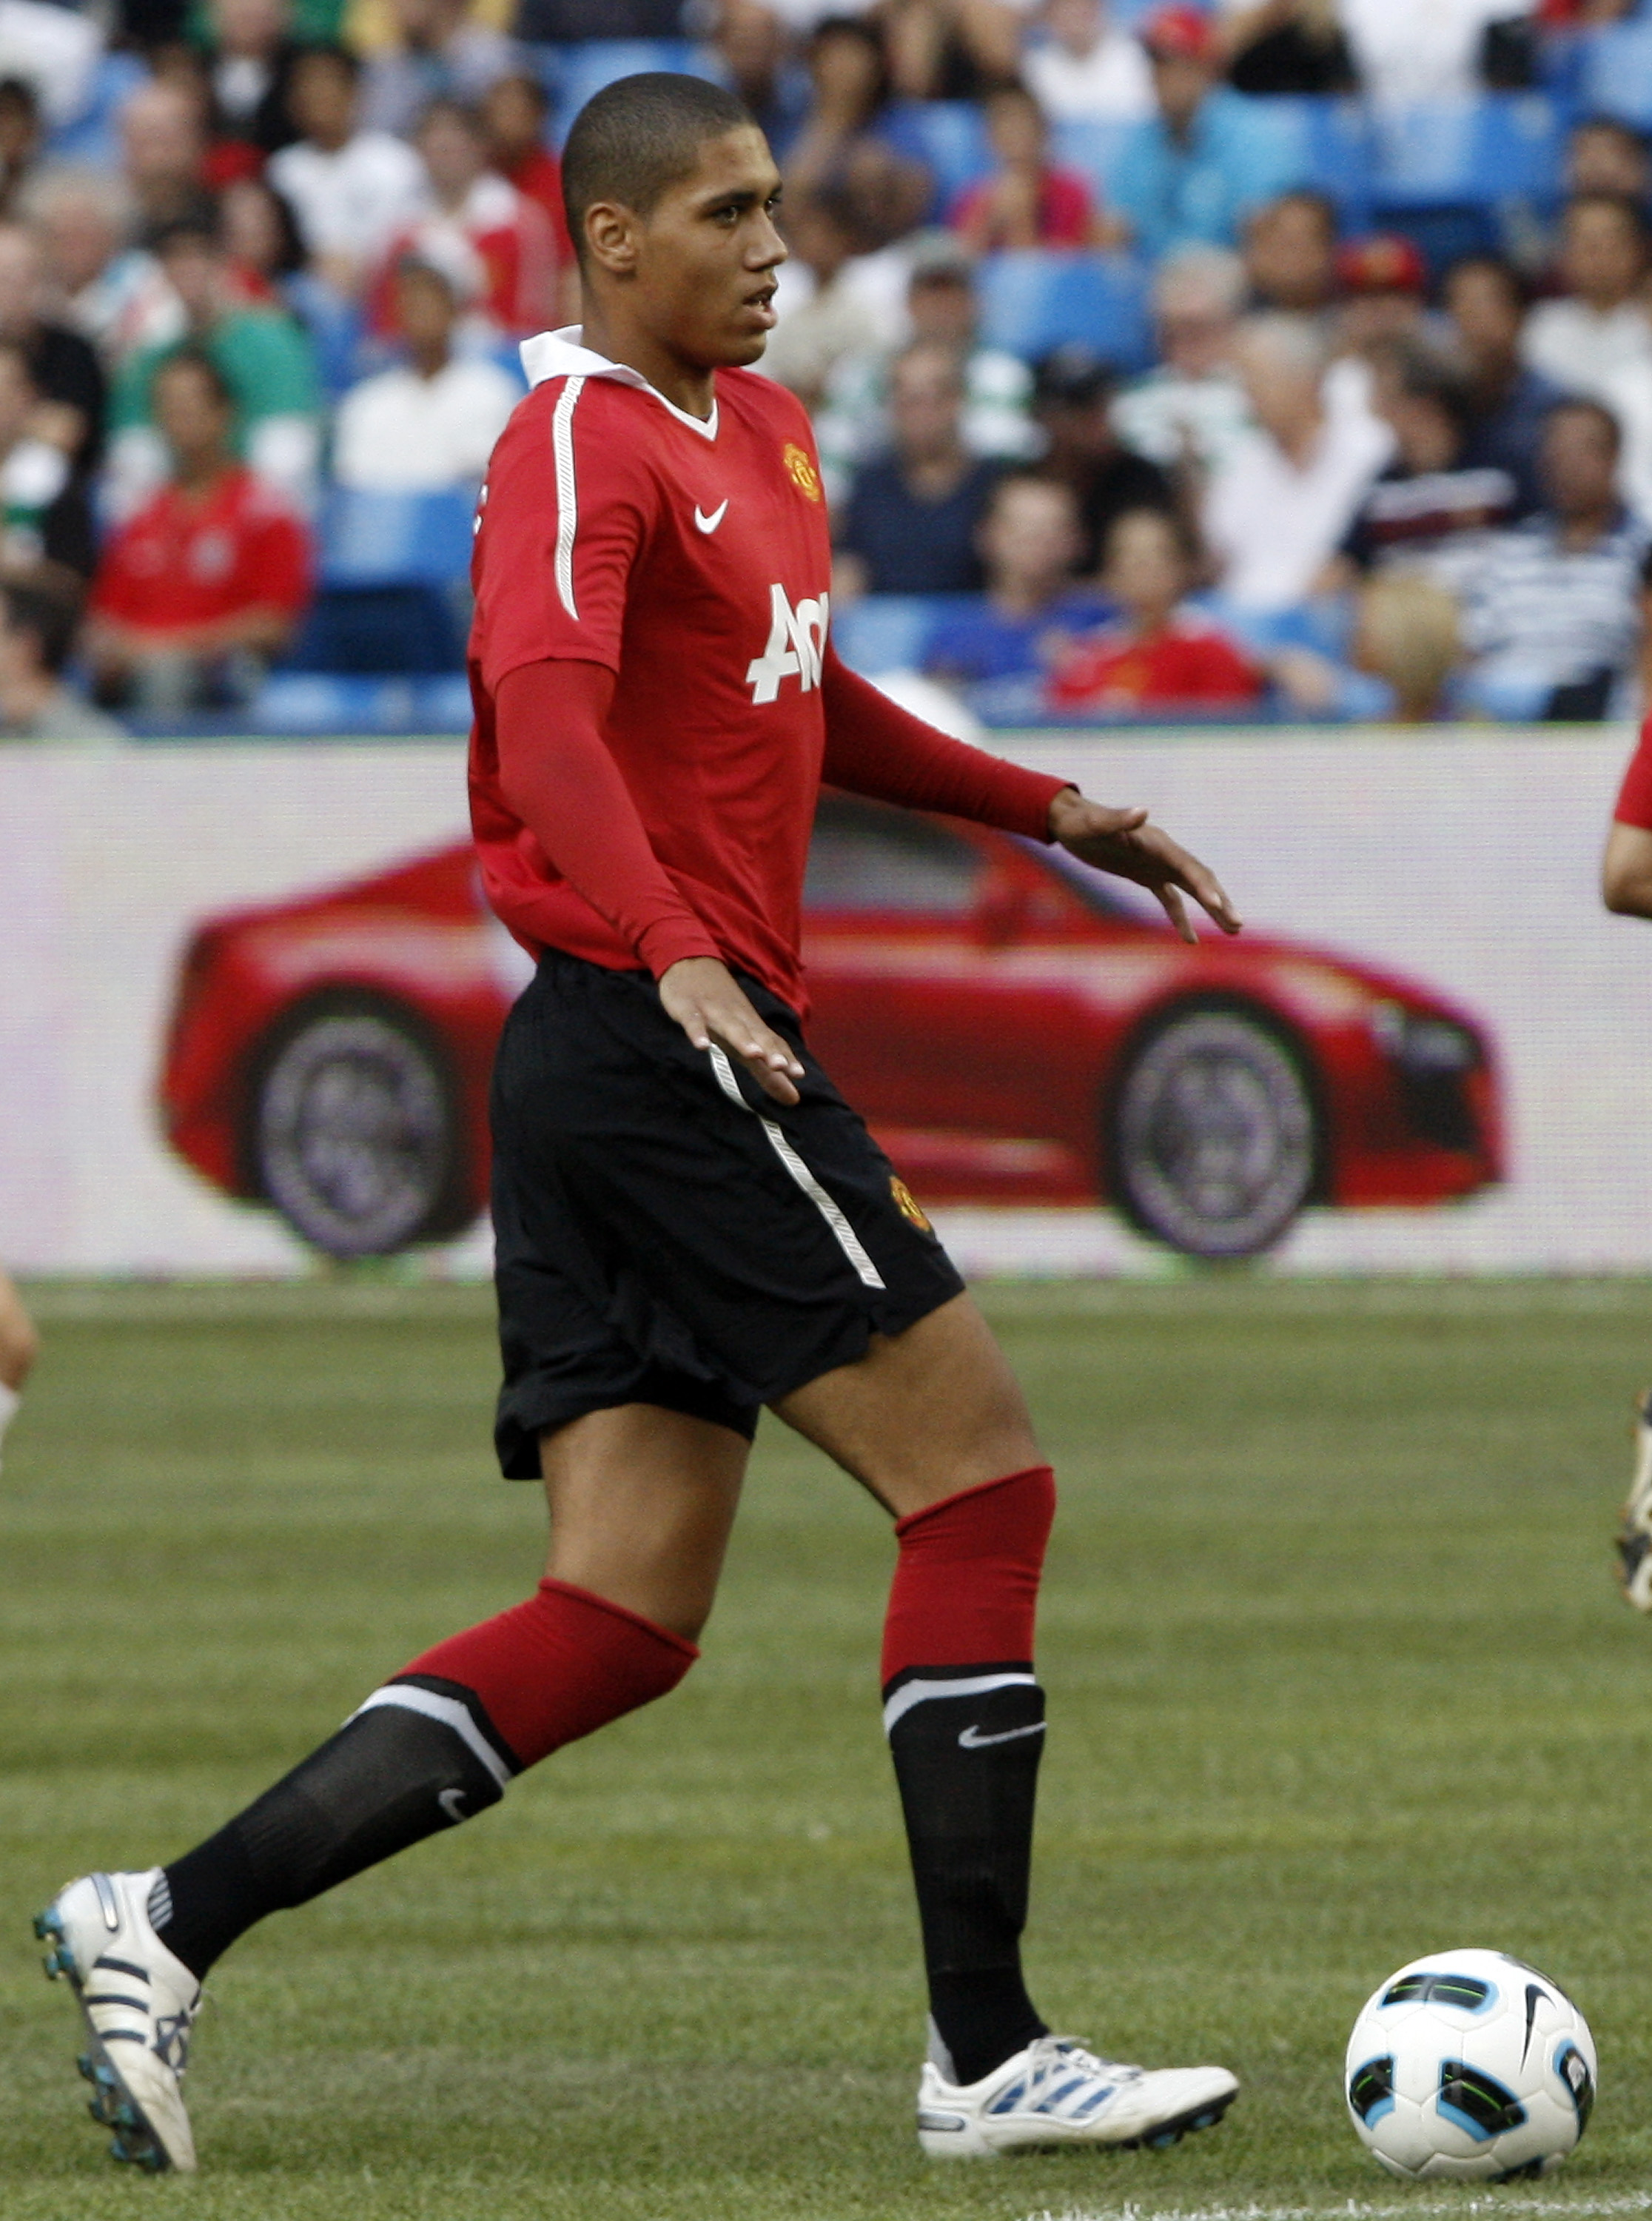 TORONTO - JULY 16: Chris Smalling #12 of Manchester United carries the ball against of Celtic F.C. during a friendly match at the Rogers Centre July 16, 2010 in Toronto, Ontario, Canada. Manchester United won 3-1.  (Photo by Abelimages/Getty Images)